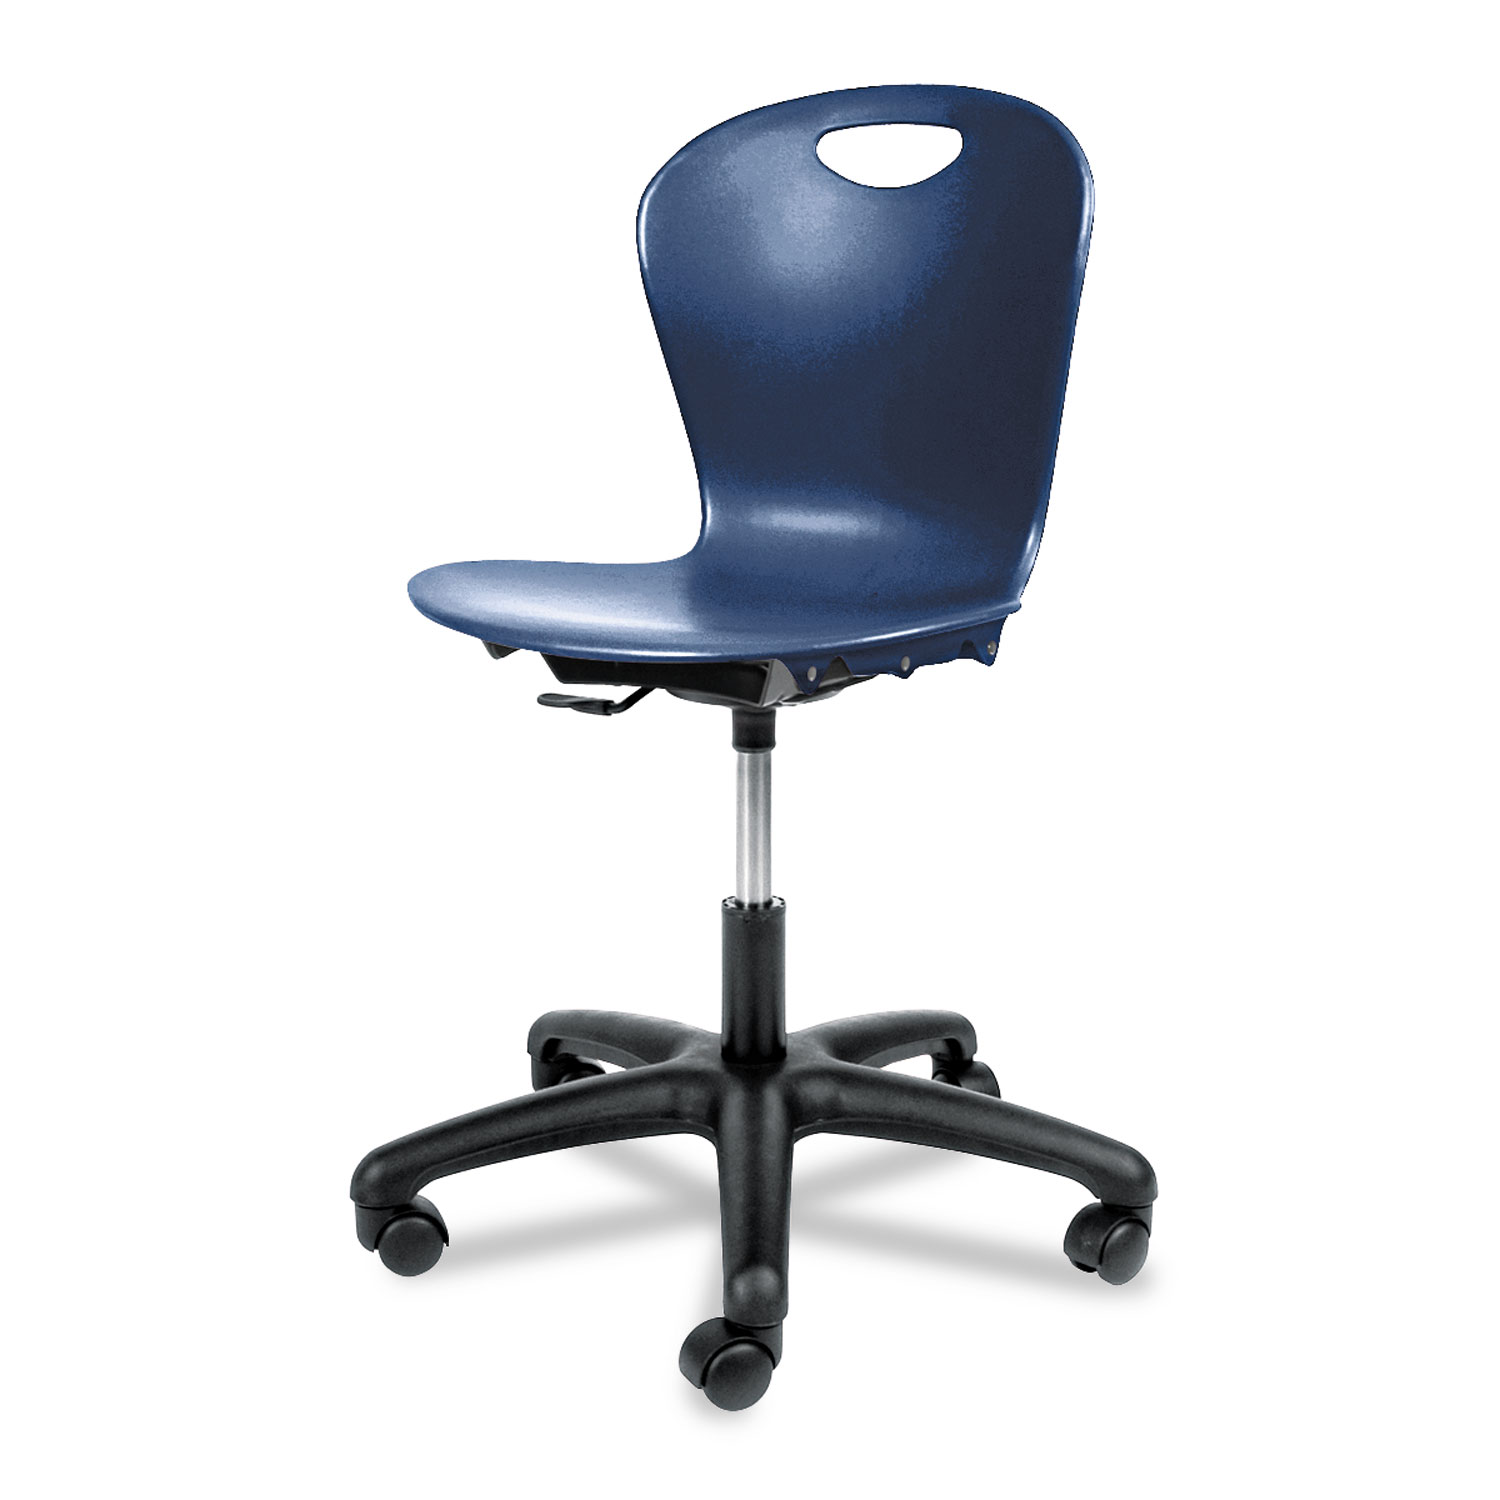 Adjustable-Height Task Chair, 24-1/8w x 24-1/8d x 3034-1/2h, Navy